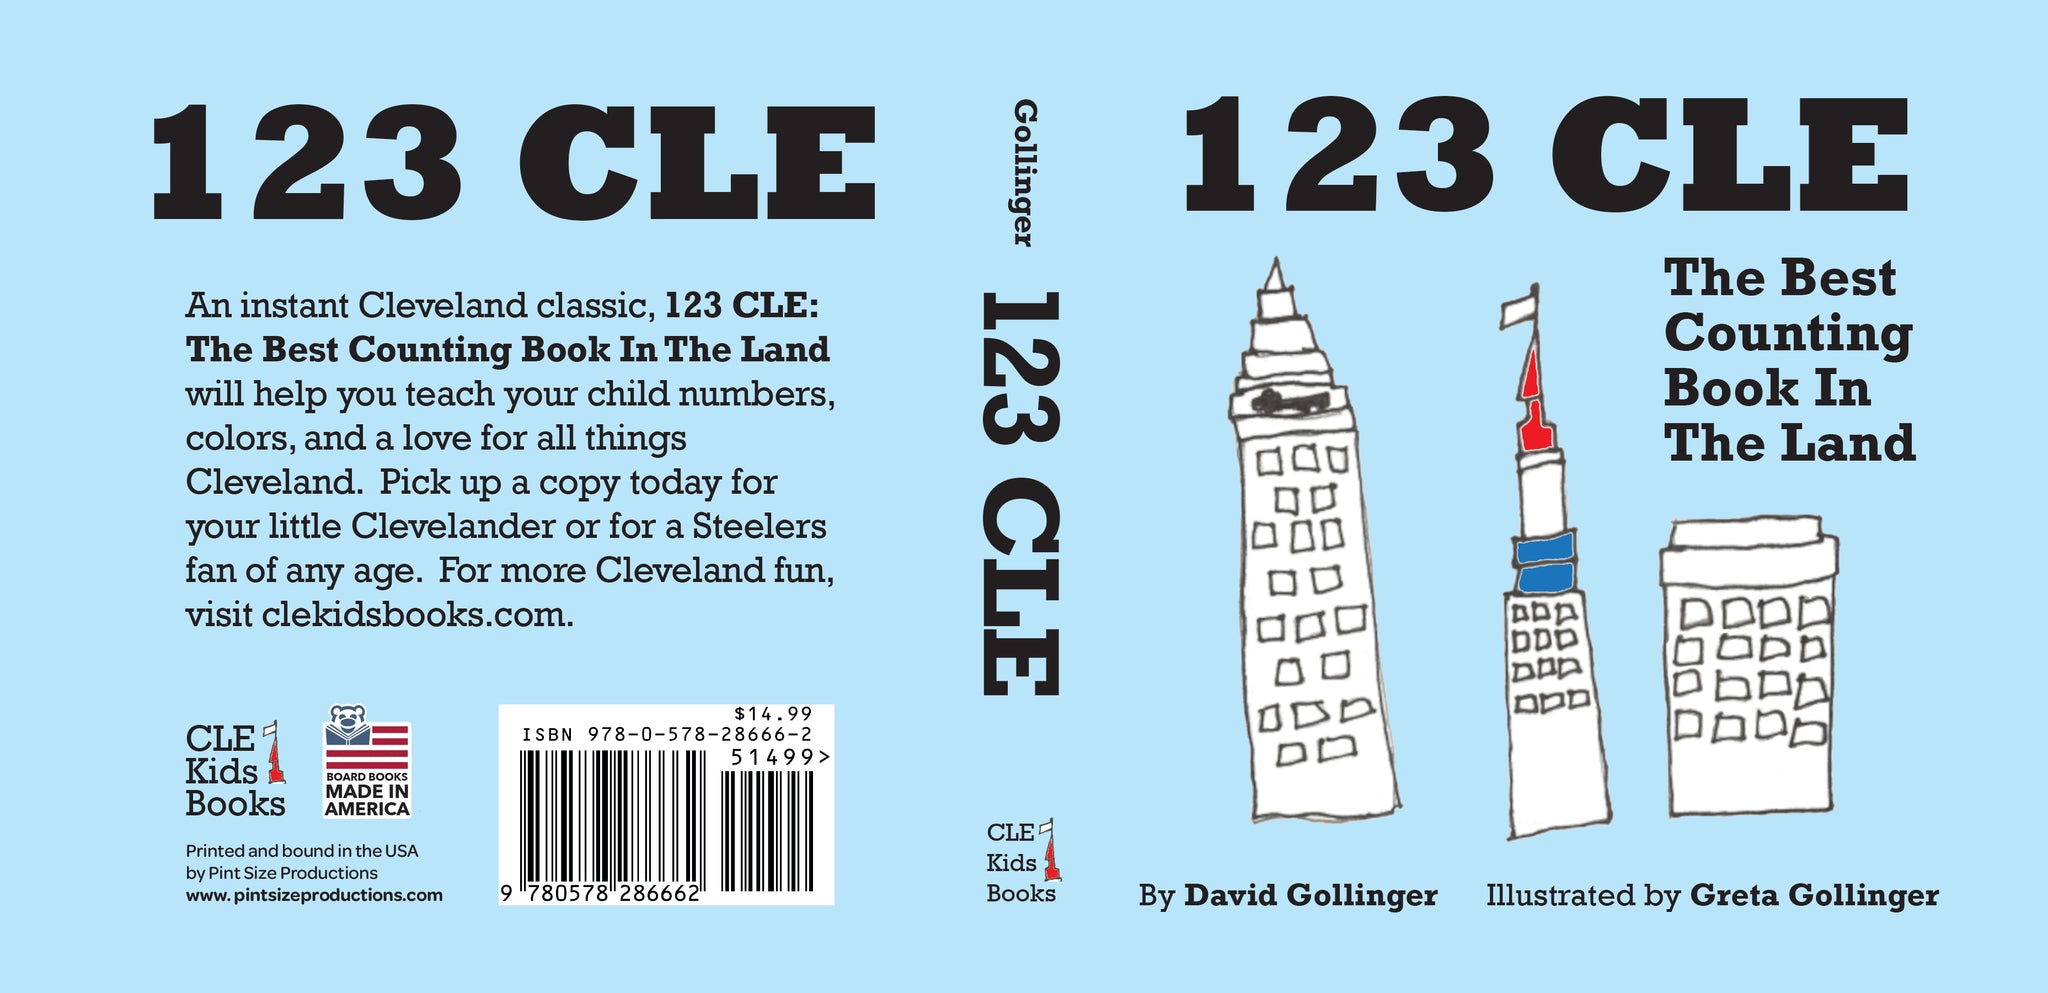 123 CLE: The Best Counting Book In The Land